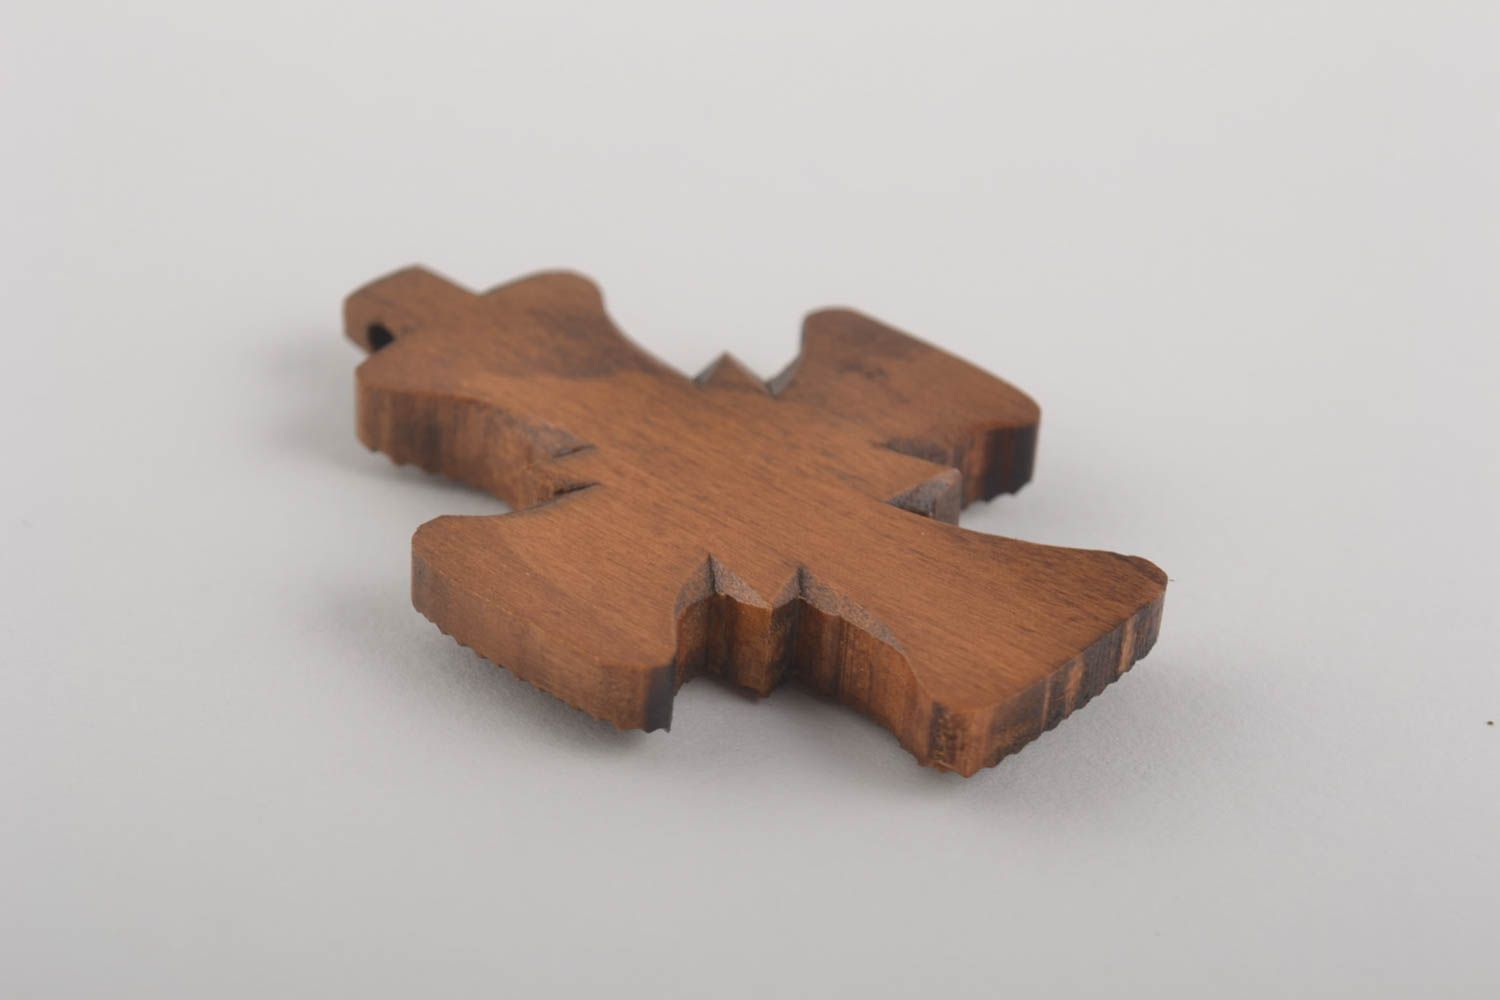 Handcrafted jewelry wooden jewelry cross pendant designer accessories gift ideas photo 4